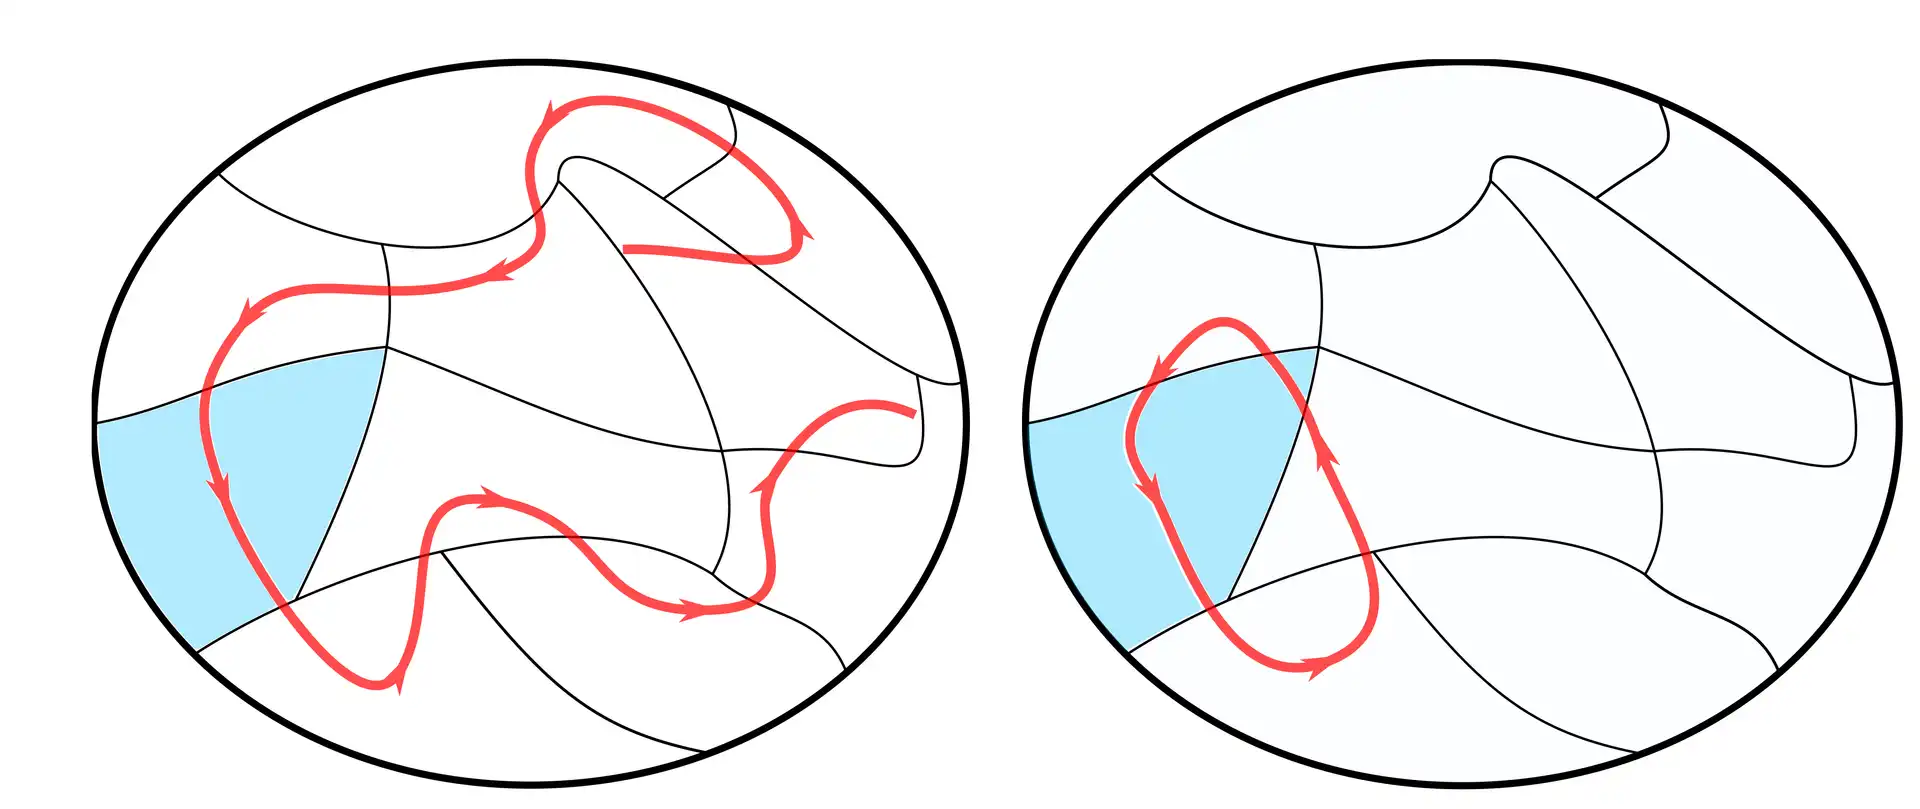 A system is ergodic if a particle traveling through it will eventually visit every possible point. In quantum mechanics, you never know exactly what point a particle is at, making ergodicity hard to track. In this schematic, the available space is divided into quantum-friendly cells, and an ergodic particle (left) winds through each of the cells, while a non-ergodic one (right) only visits a few. (Credit: Amit Vikram/JQI)